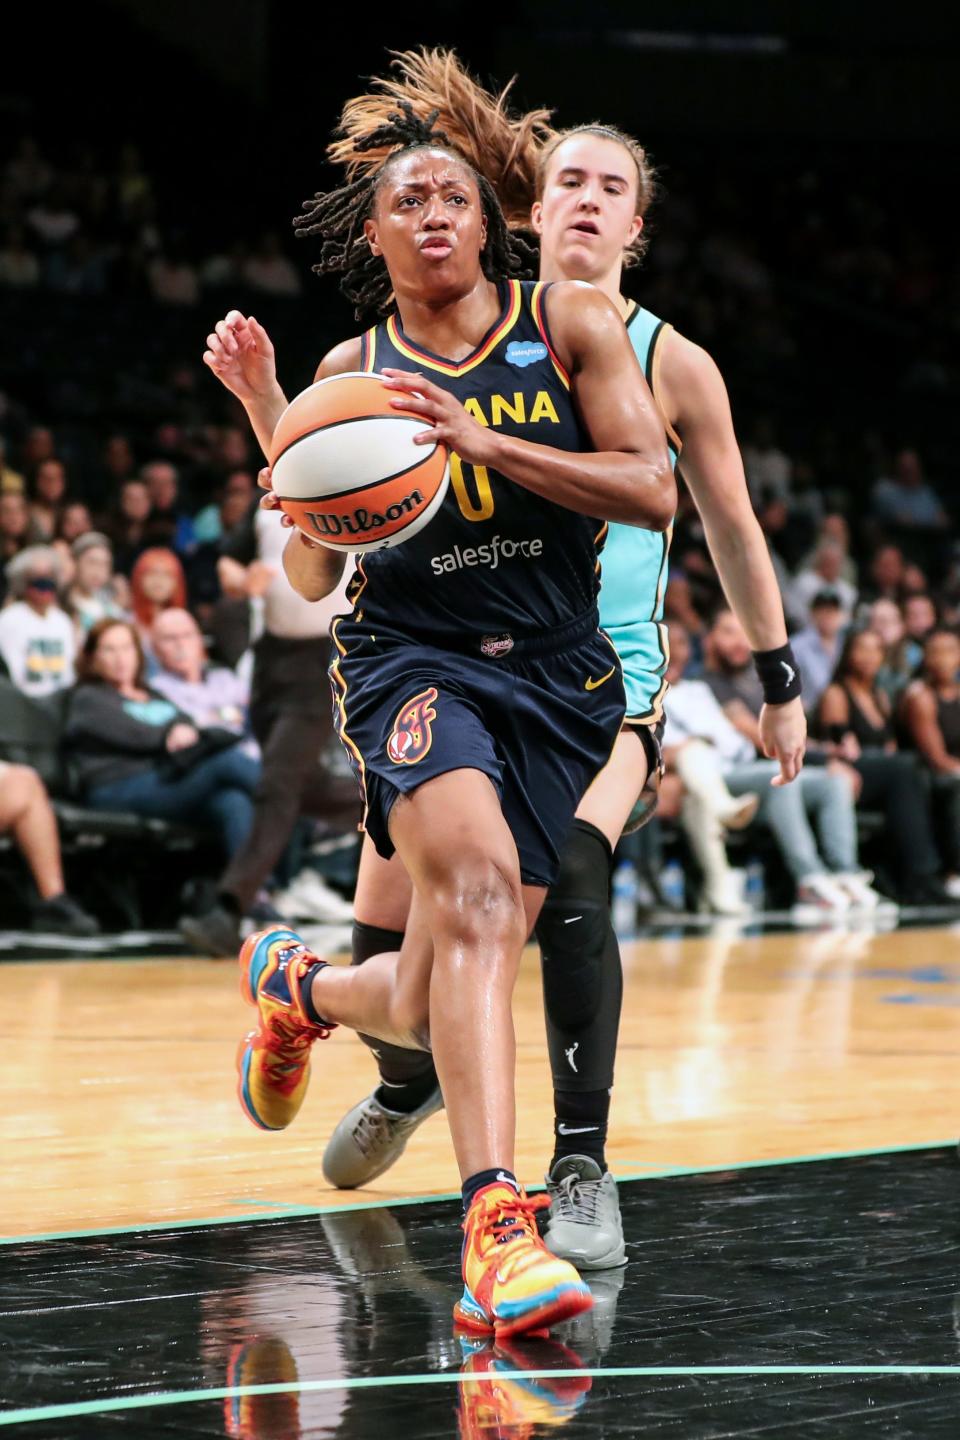 Indiana Fever guard Kelsey Mitchell led the Vikings to the 2014 state championship and is the school’s all-time leading scorer in girls basketball at 2,057 points.